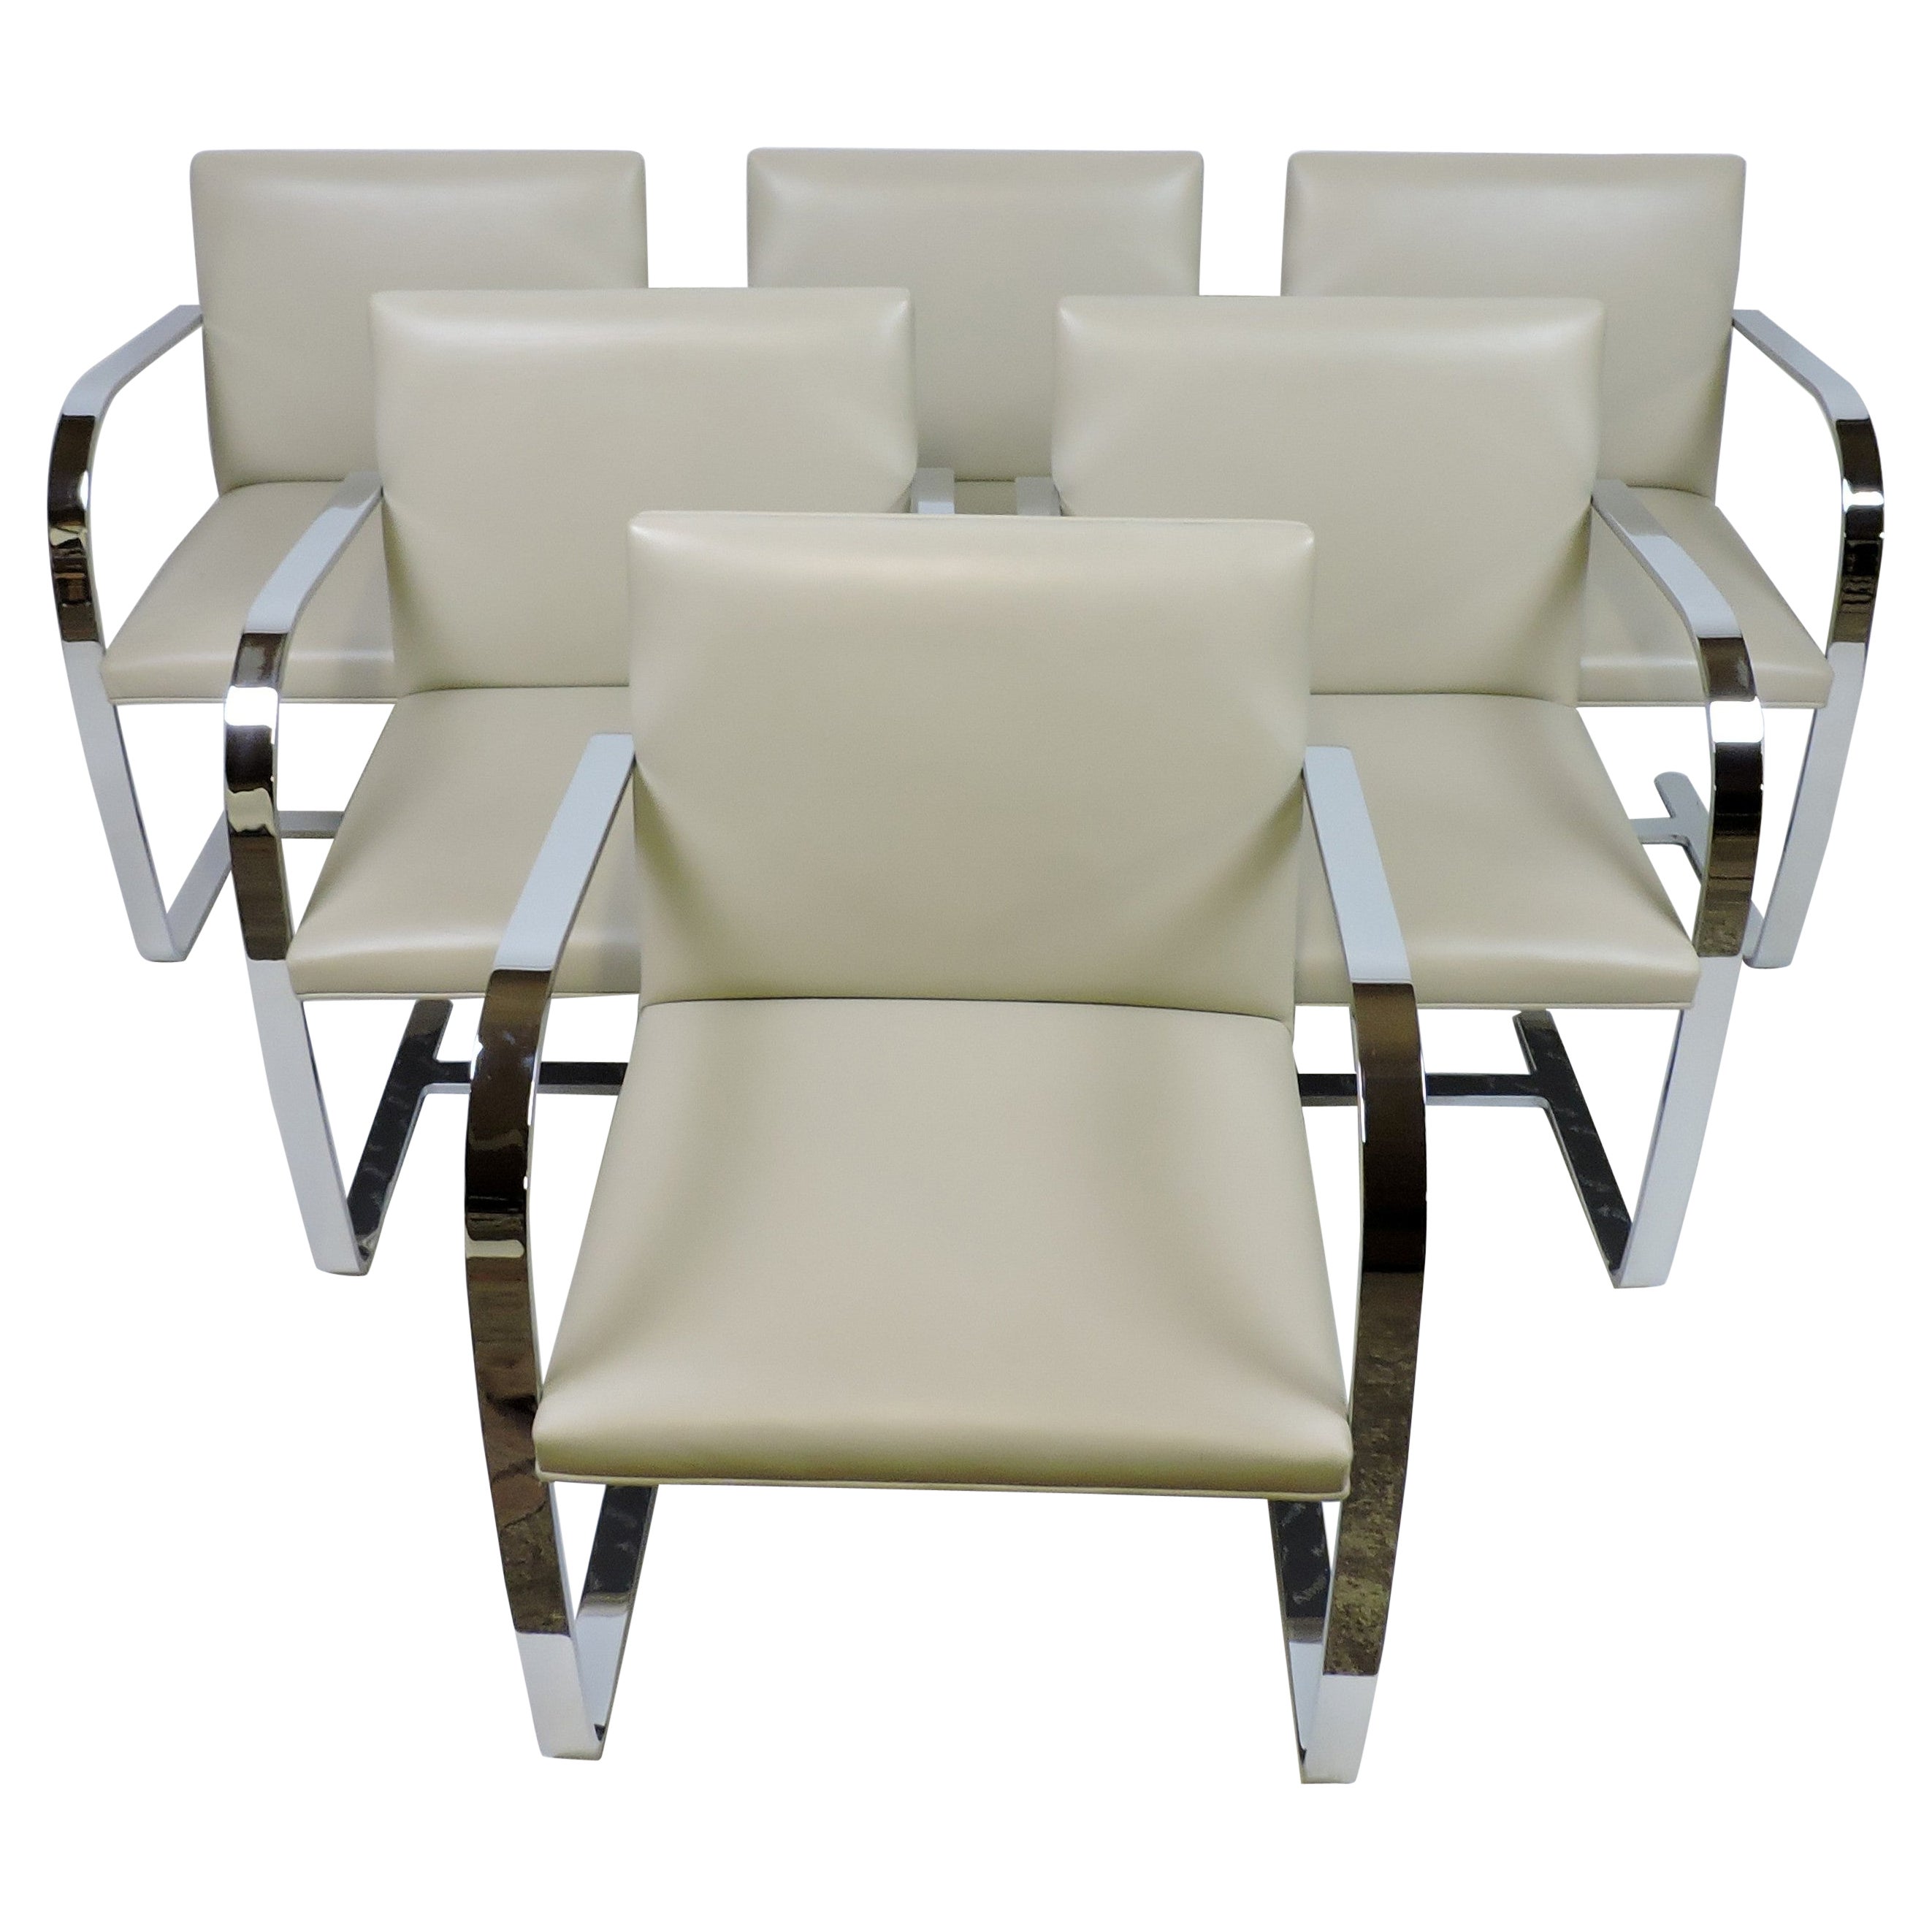 Set of Six Mies van der Rohe for Knoll Brno Flat Bar Chrome and Leather Chairs 